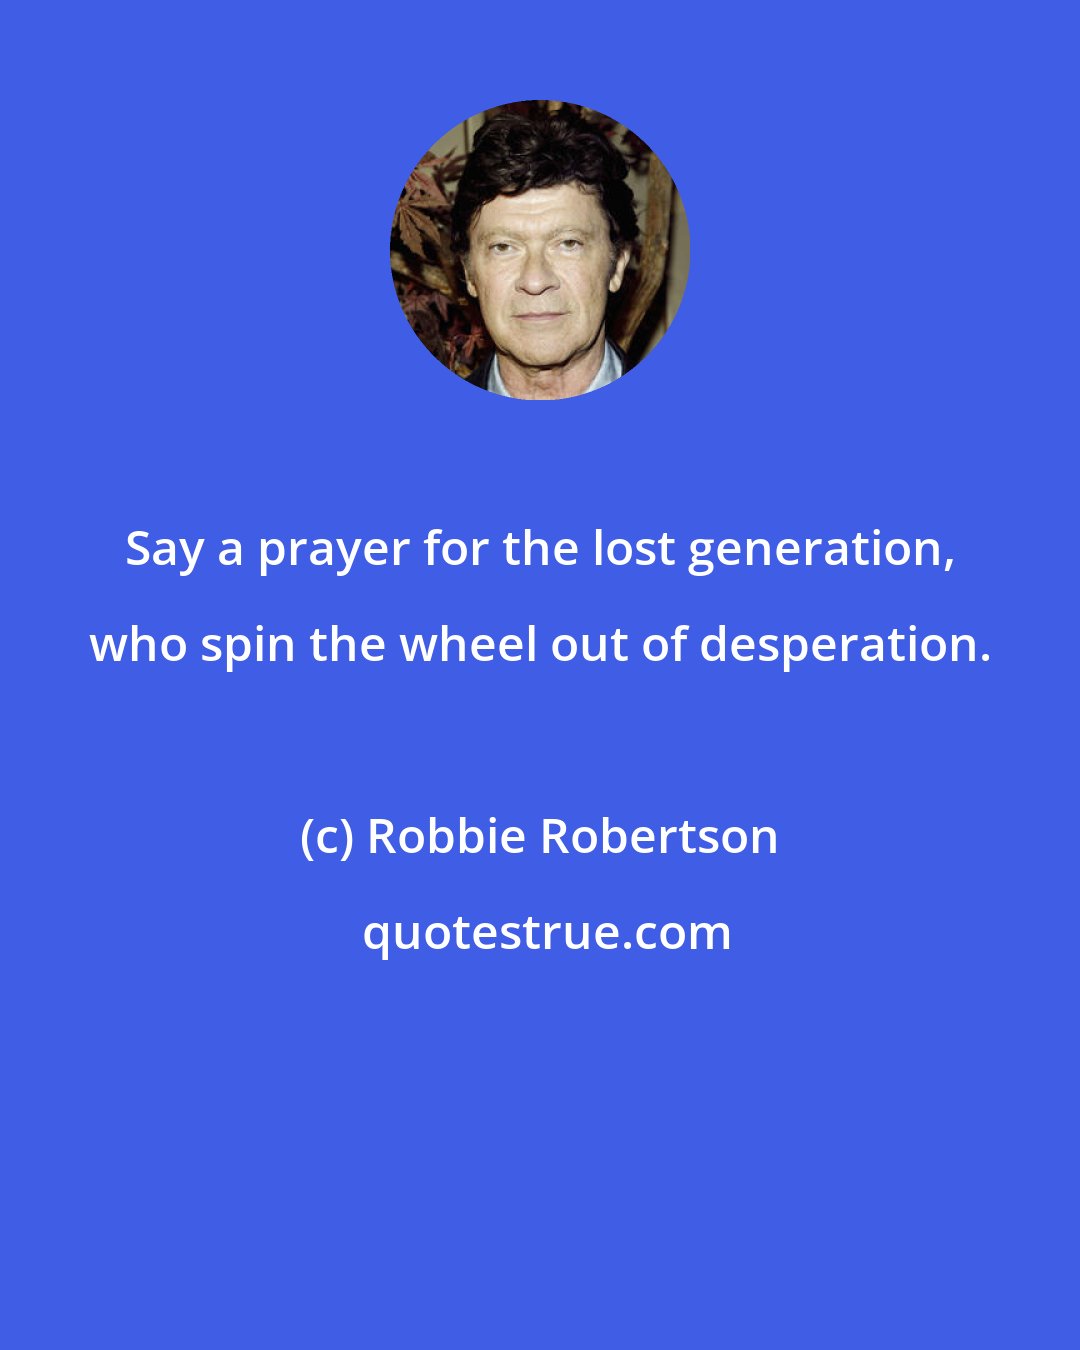 Robbie Robertson: Say a prayer for the lost generation, who spin the wheel out of desperation.